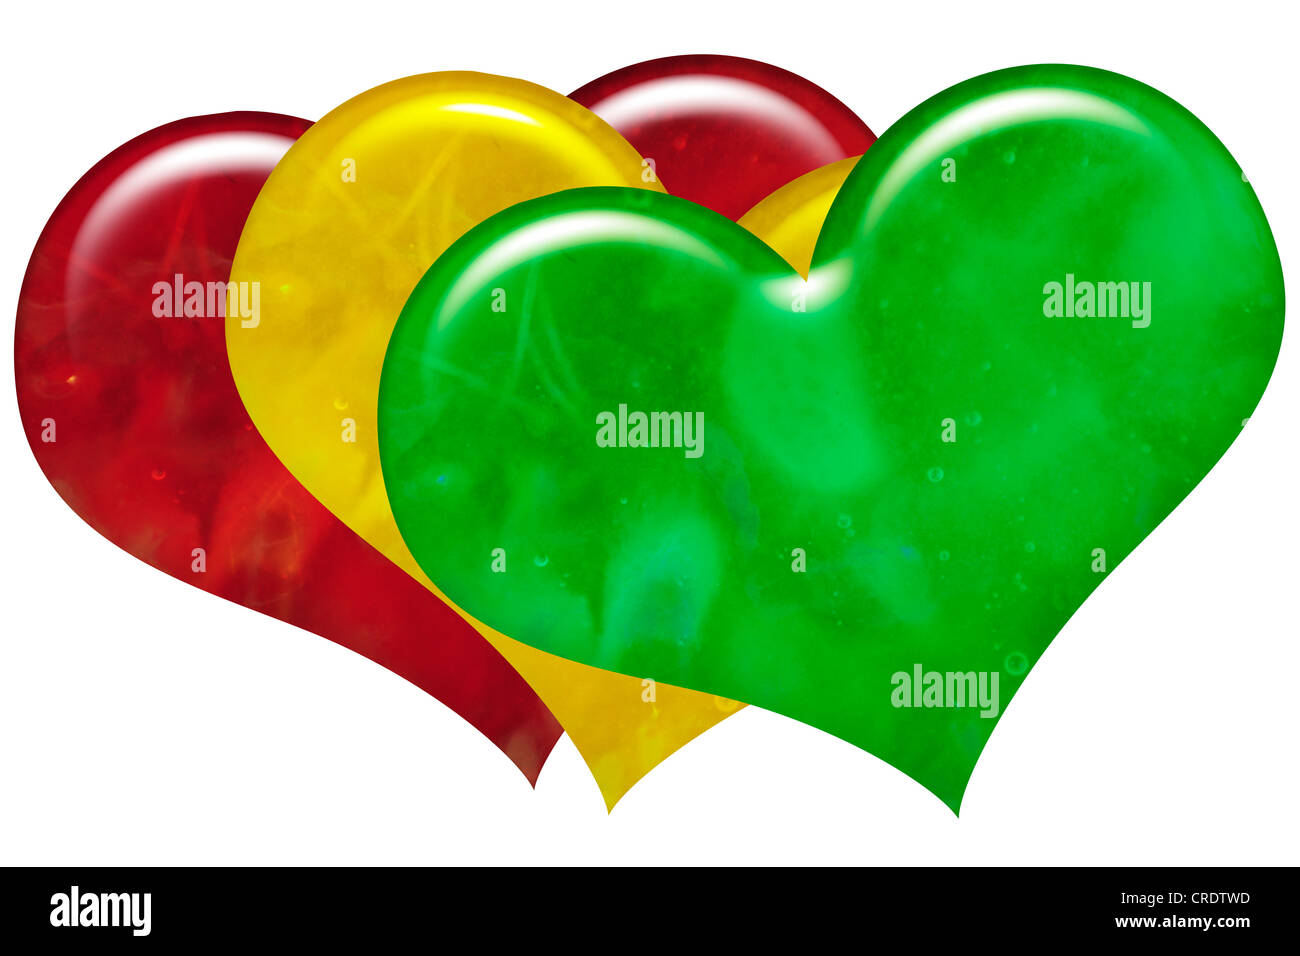 Hearts, red, yellow and green, illustration Stock Photo